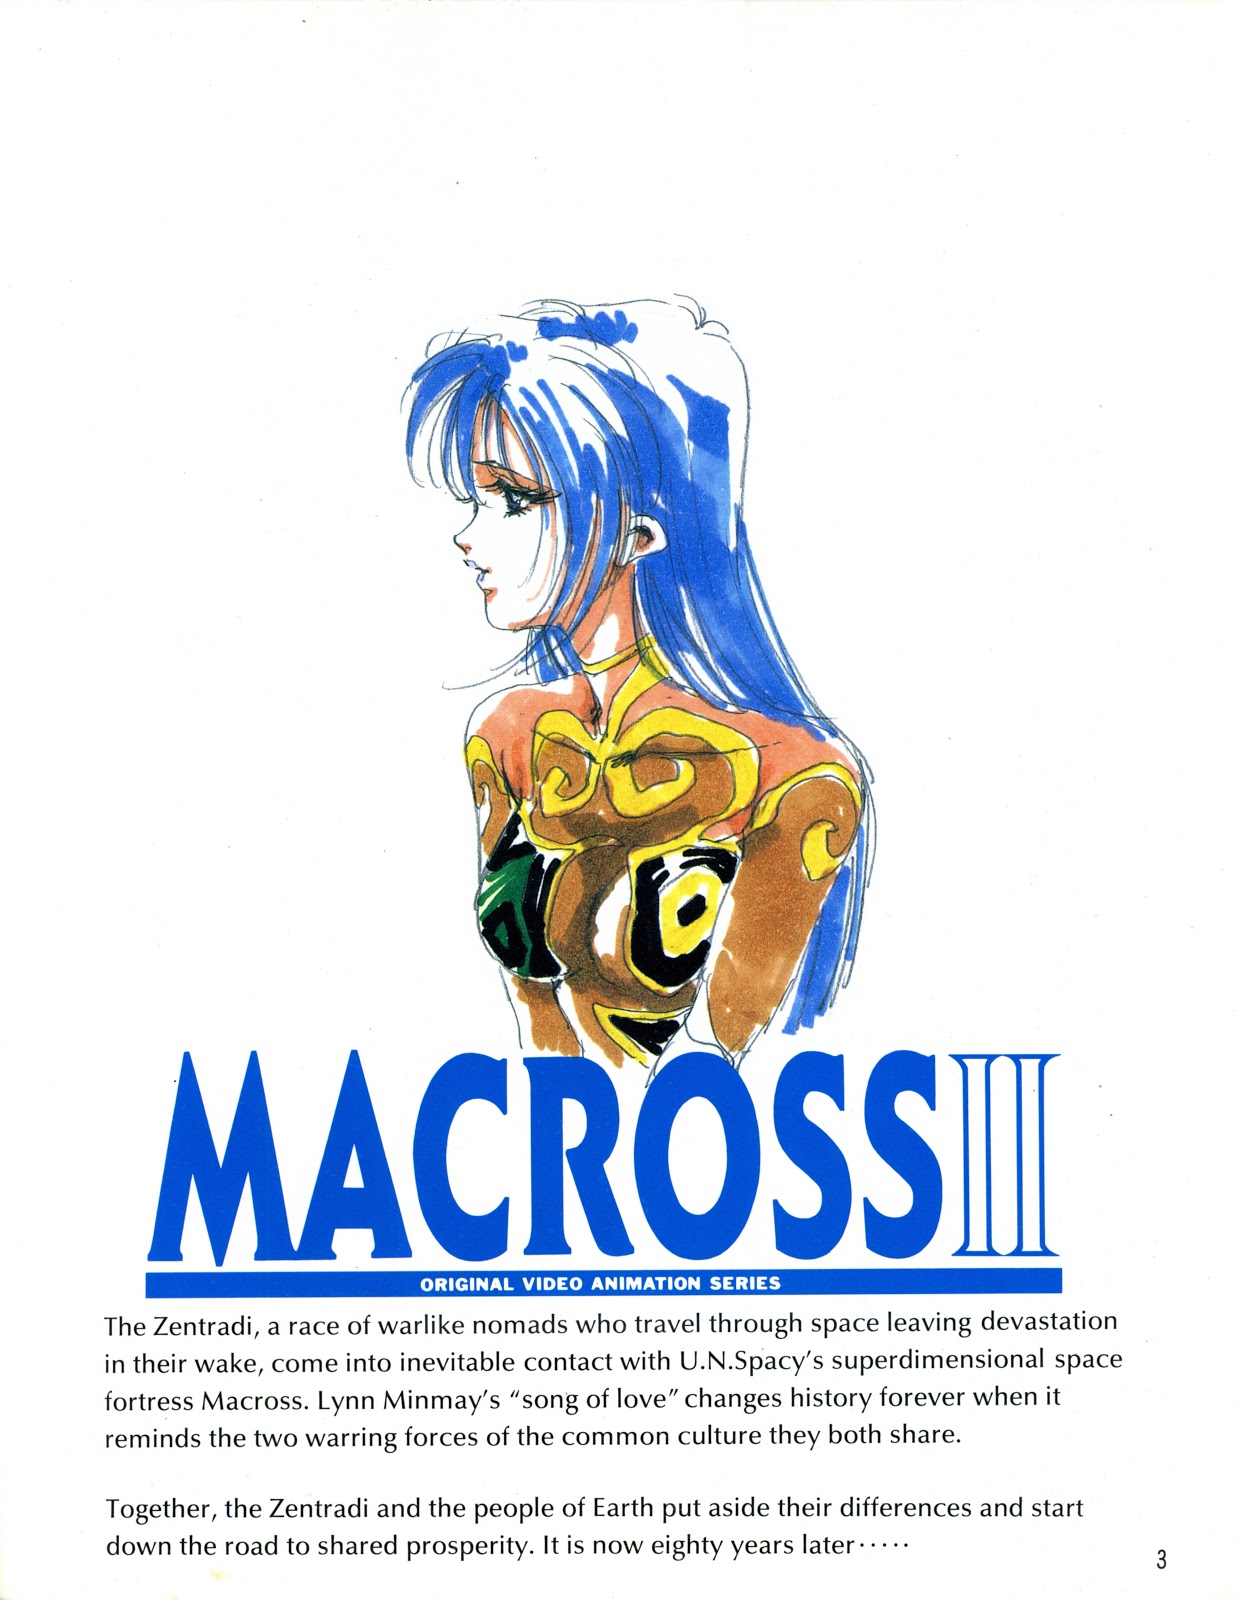 This is Animation Special - Macross II